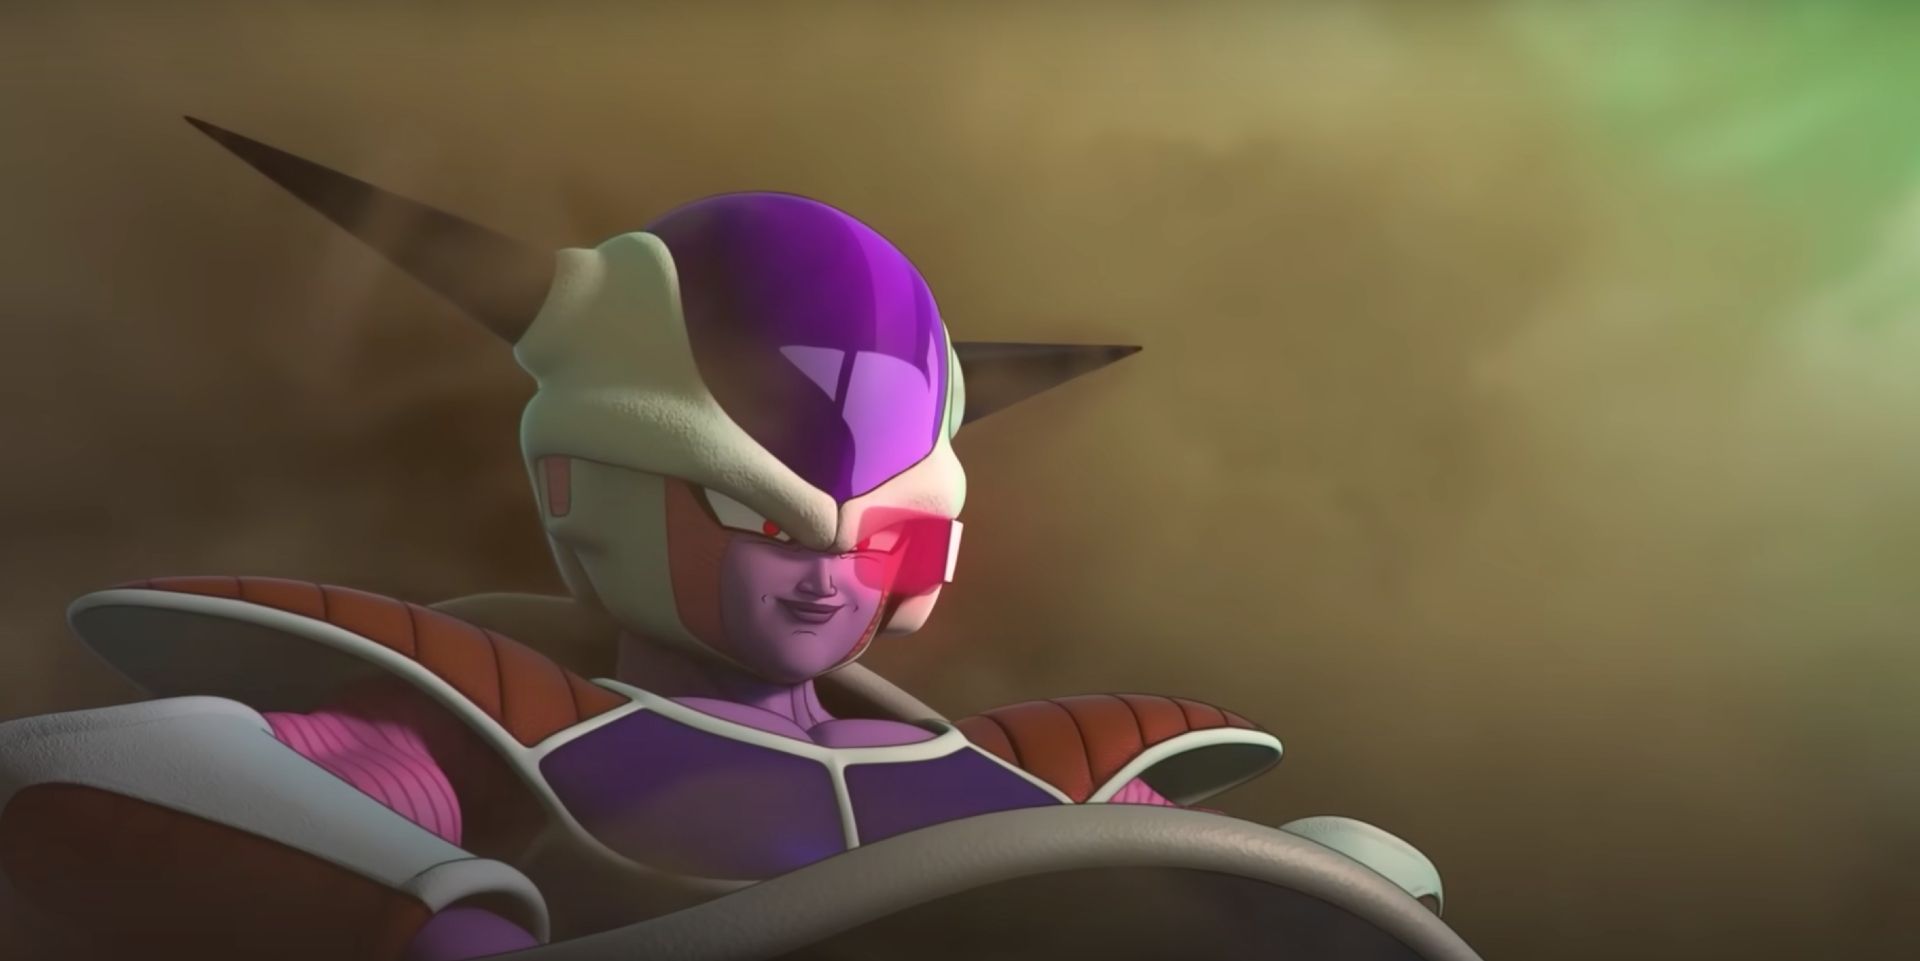 Frieza First Form with Scouter in DB: The Raiders